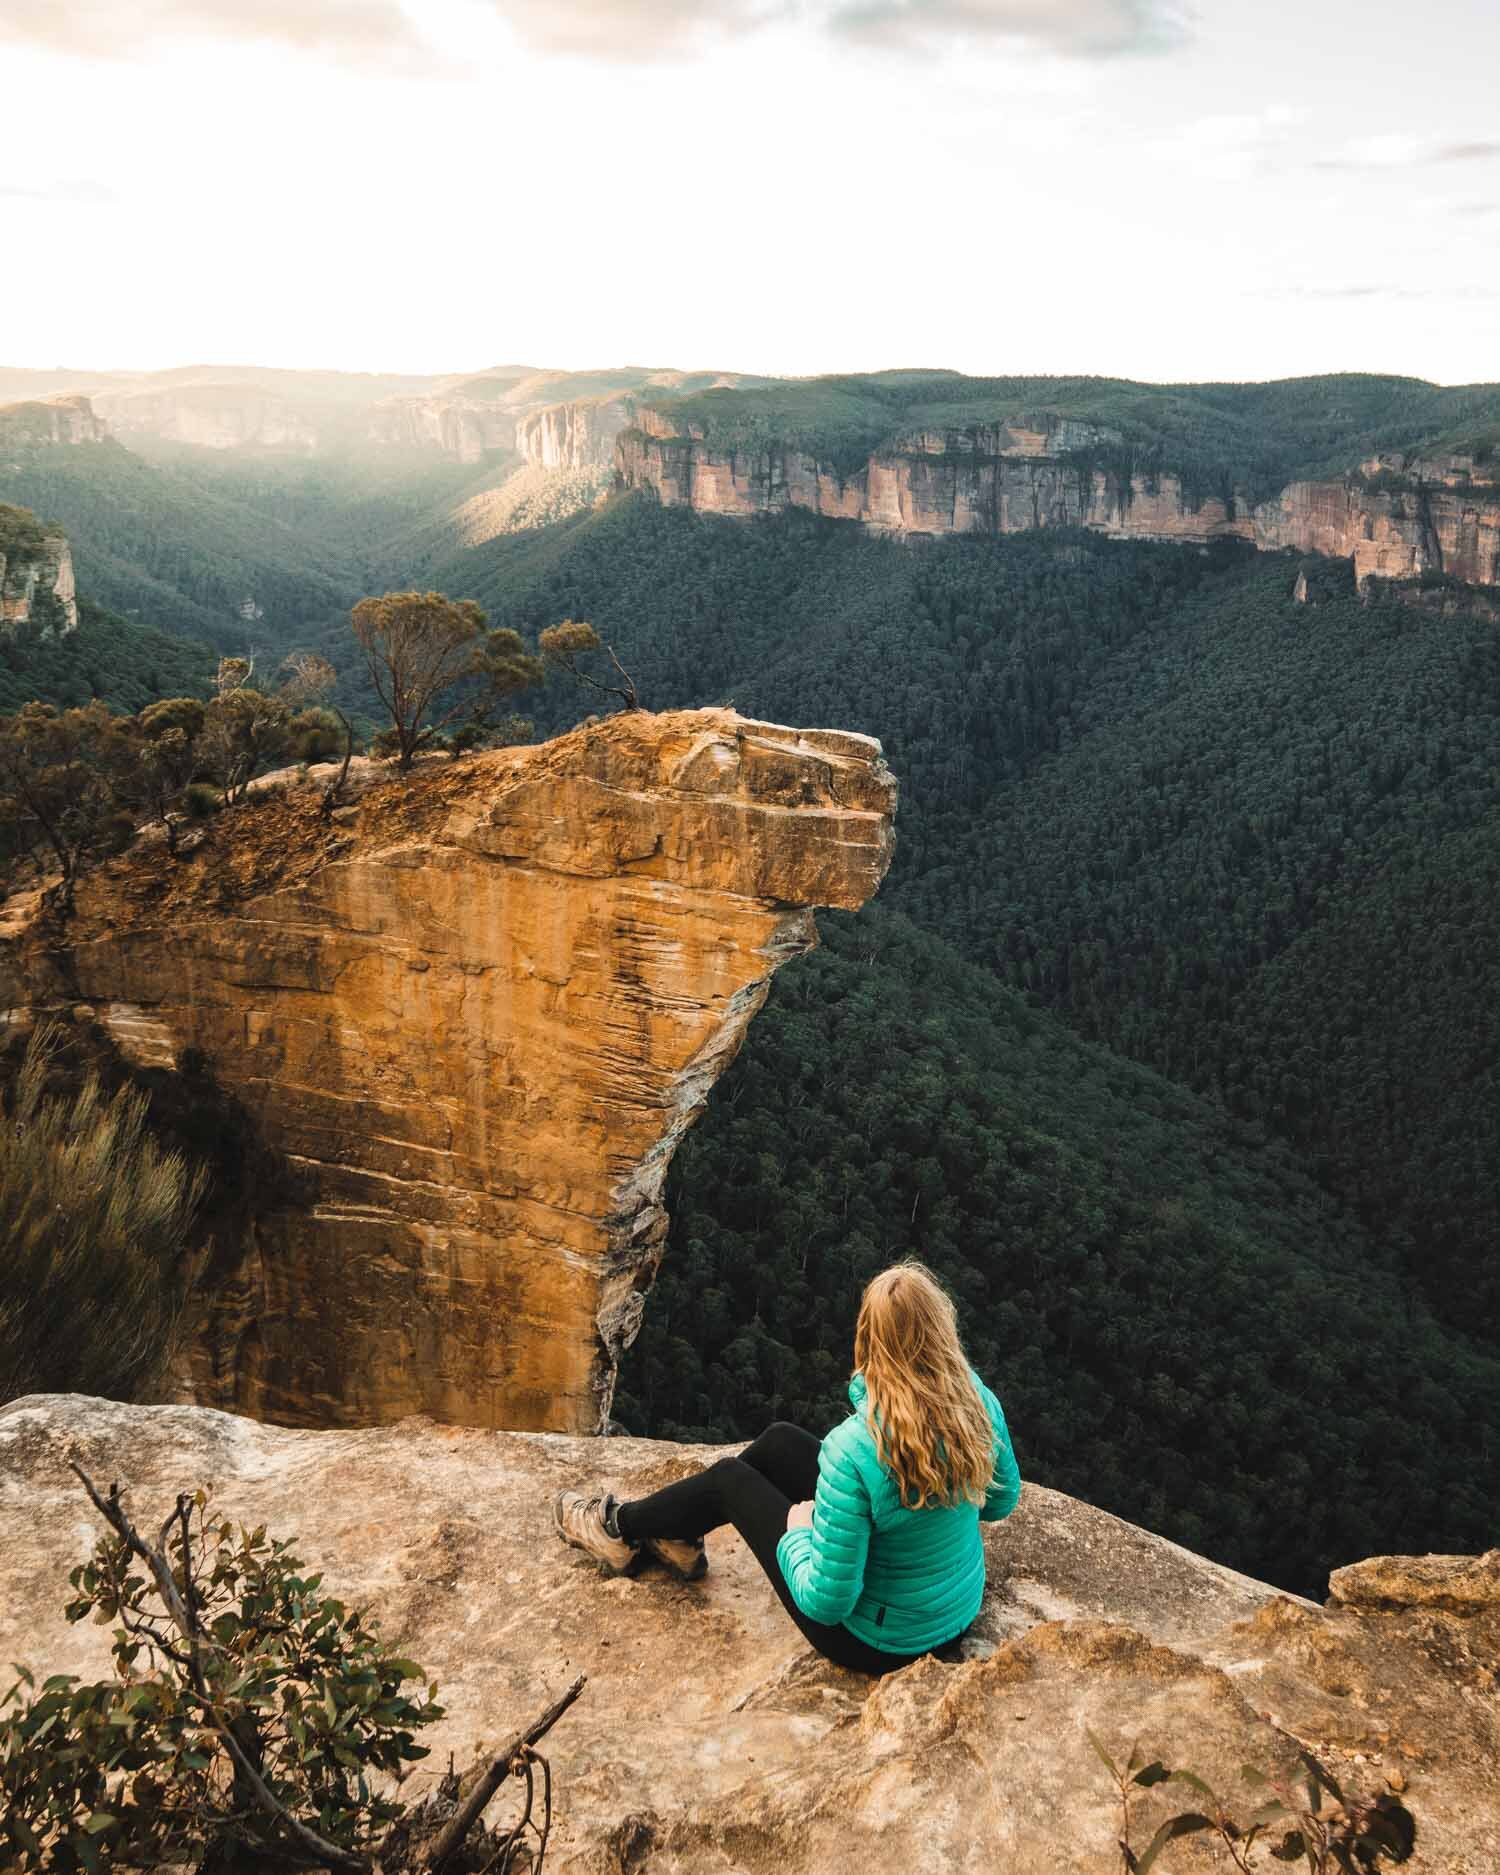 Blue Mountains Scenic Wonders, Hiking Trails, Wildlife Beauty